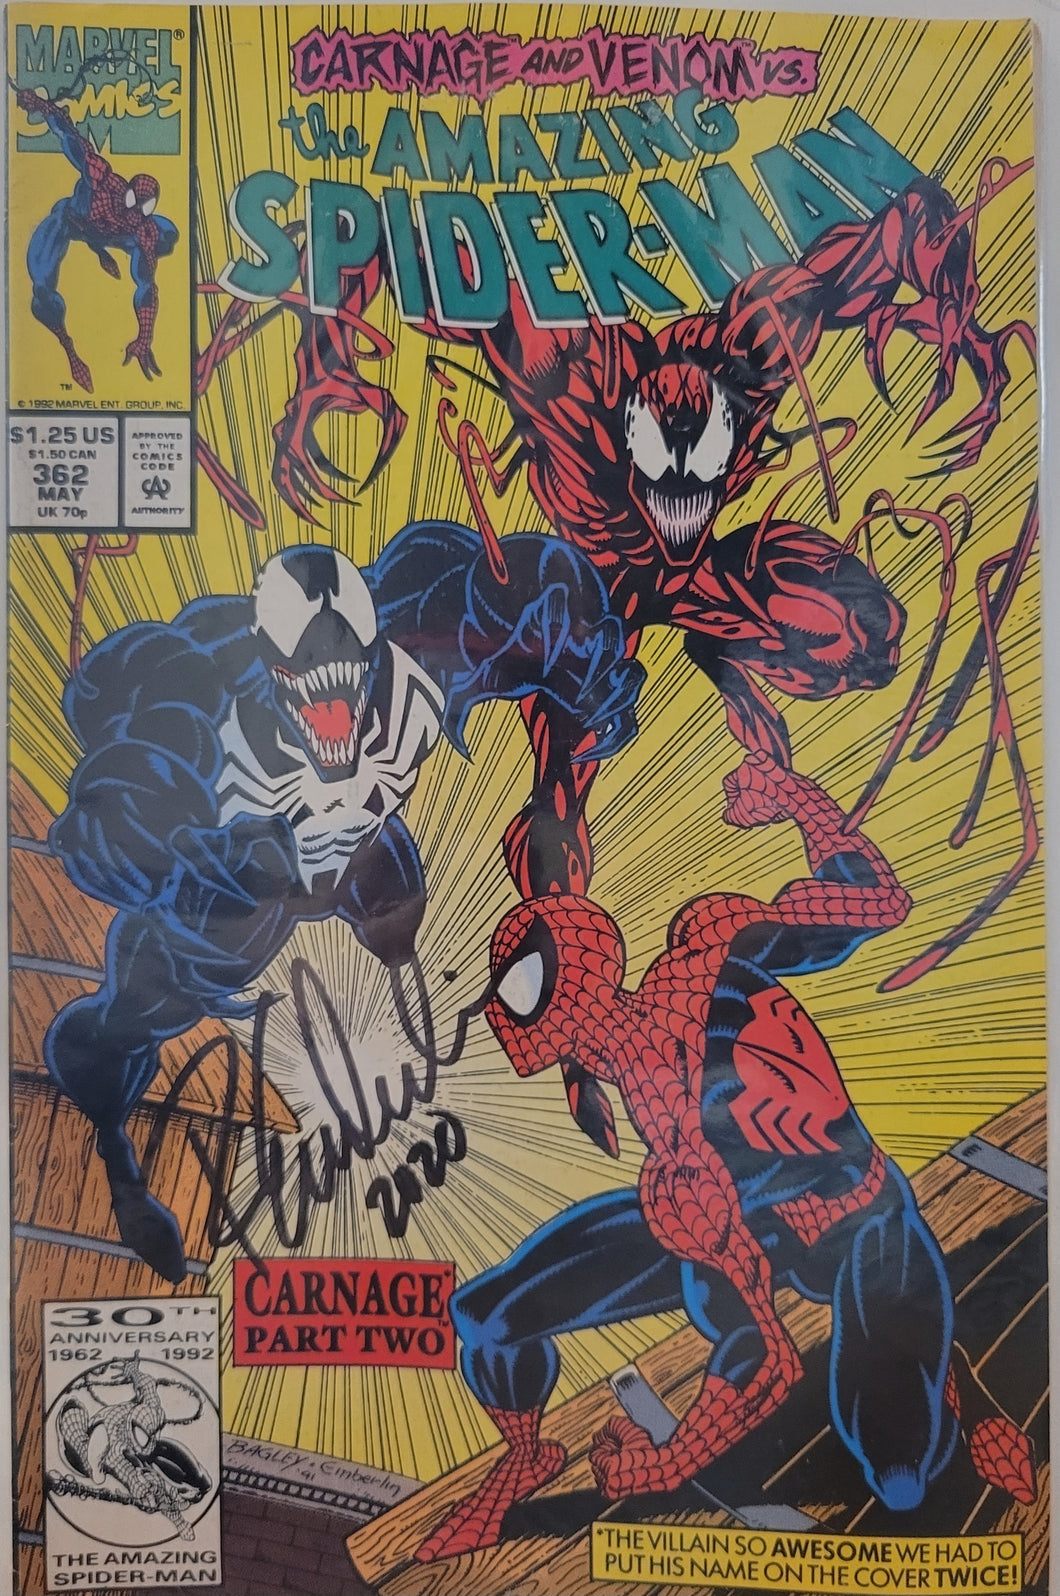 Amazing Spider-Man #362 Signed by Randy Emberlin w/COA